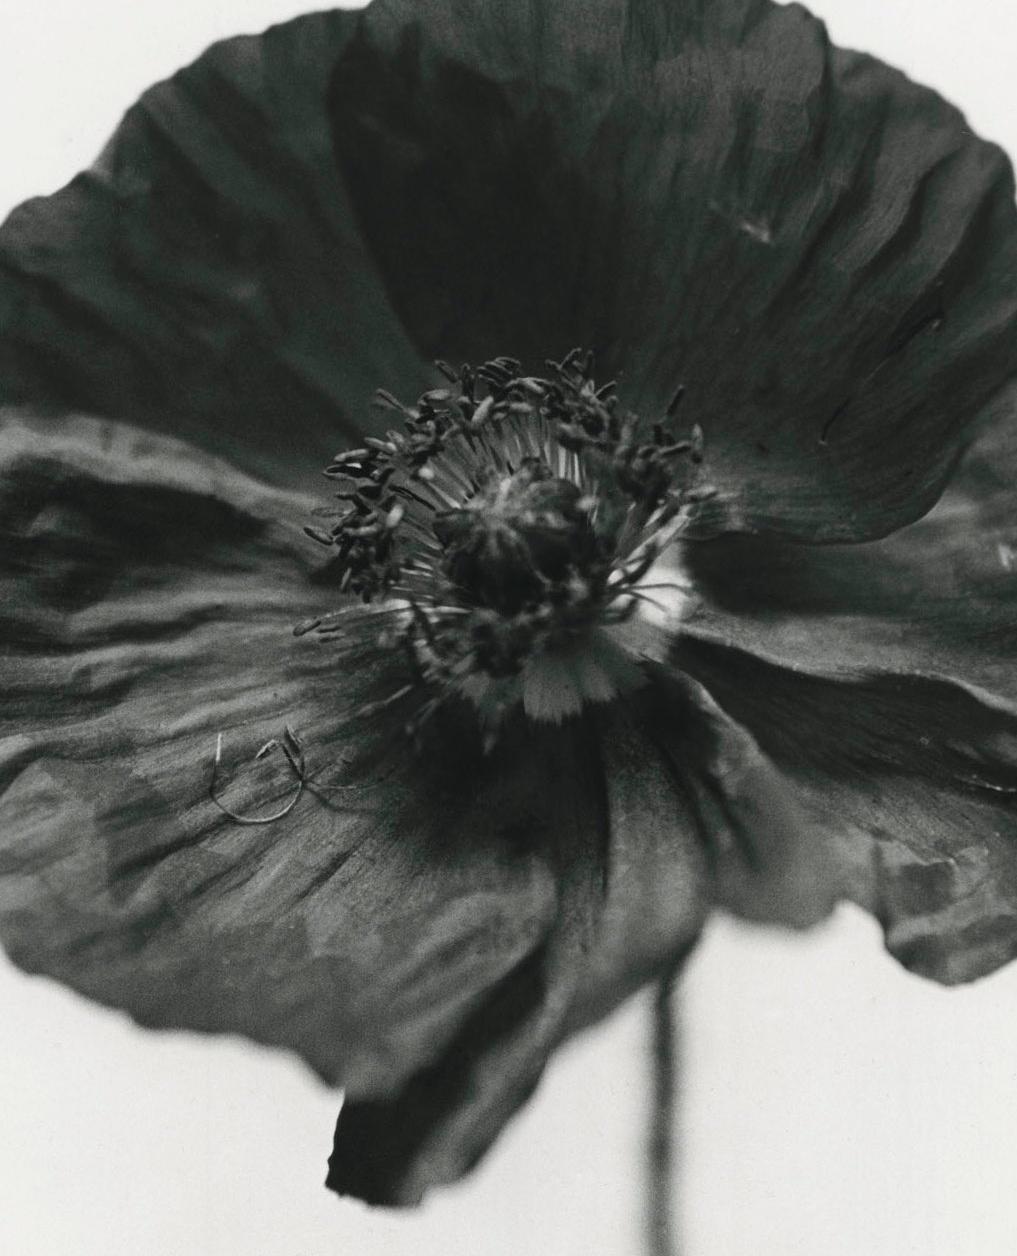 Emma SUMMERTON (*1970, Australia)
Poppy, London, 2000
Archival pigment print on Hahnemühle Paper
120 x 100 cm (47 1/4 x 39 3/8 in.)
Edition of 5, plus 2 AP; Ed. no. 1/5
Print only

Australian born Emma Summerton (*1970) graduated from the National